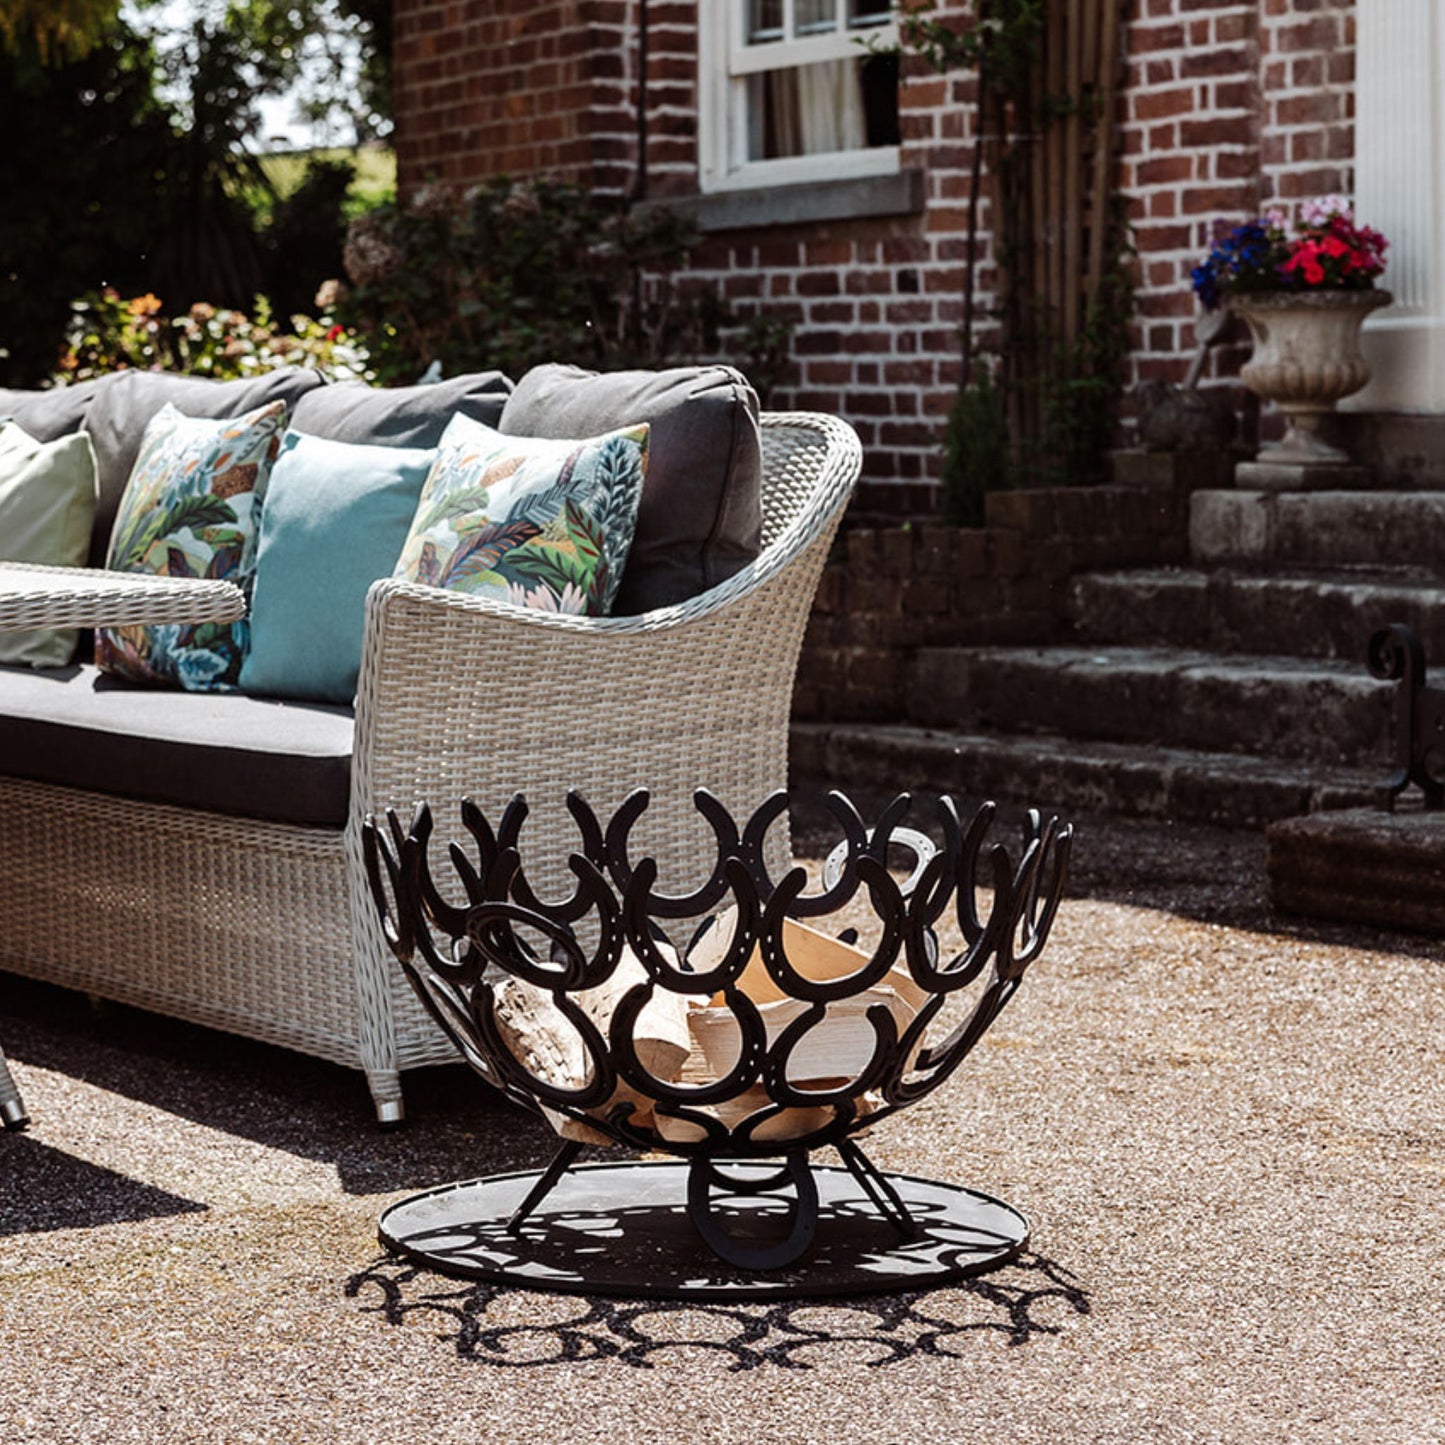 A handmade horseshoe fire pit next to a seating area in the garden of a country house. The fire pit has been filled with firewood and has a black painted finish.